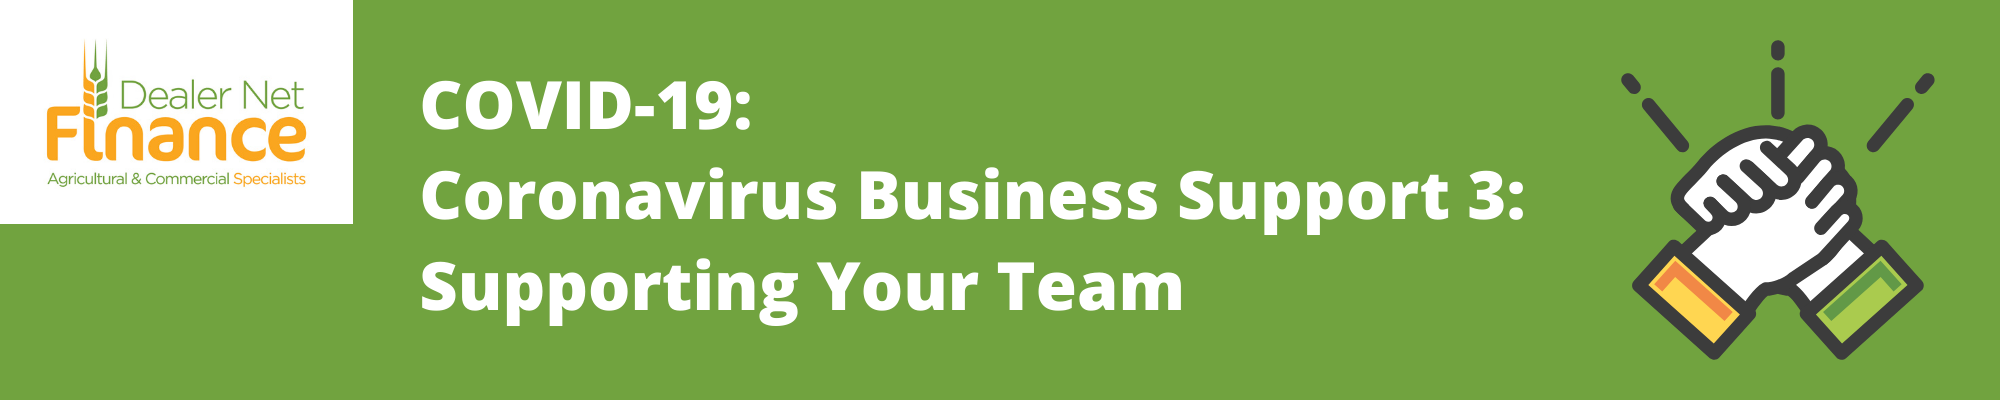 Covid-19: Business Support – Supporting Your Team